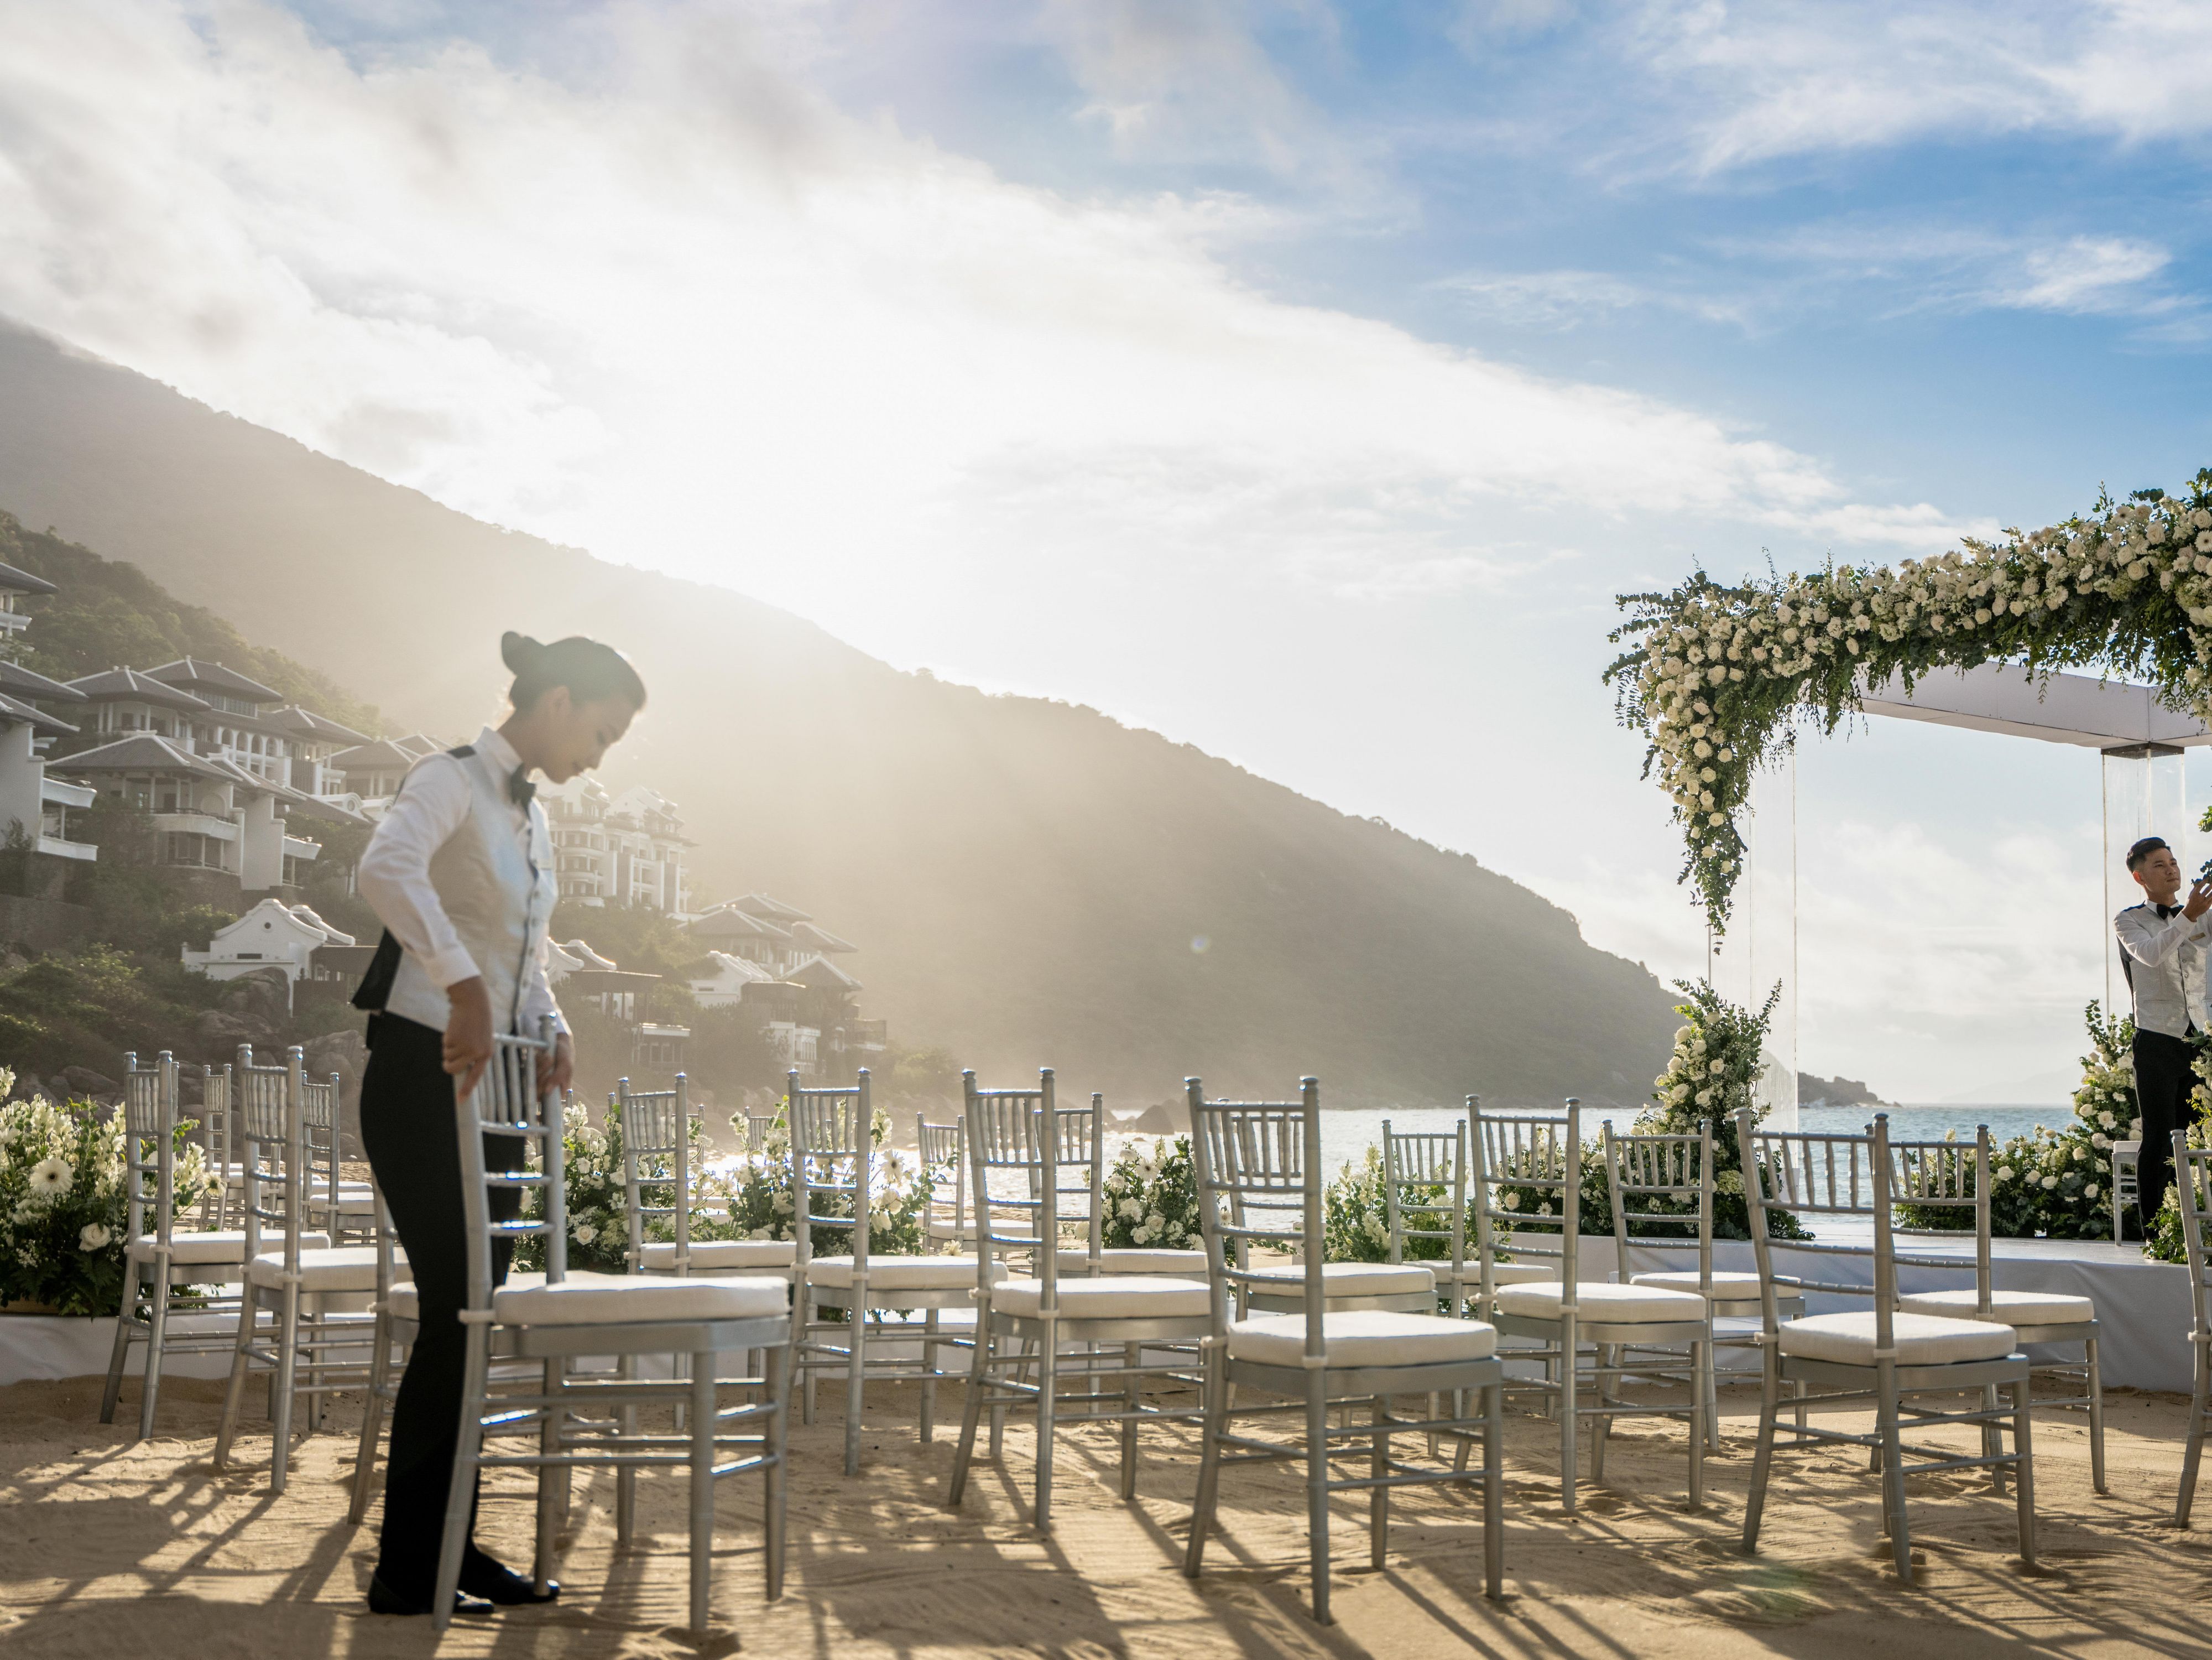 The perfect destination for your dream wedding